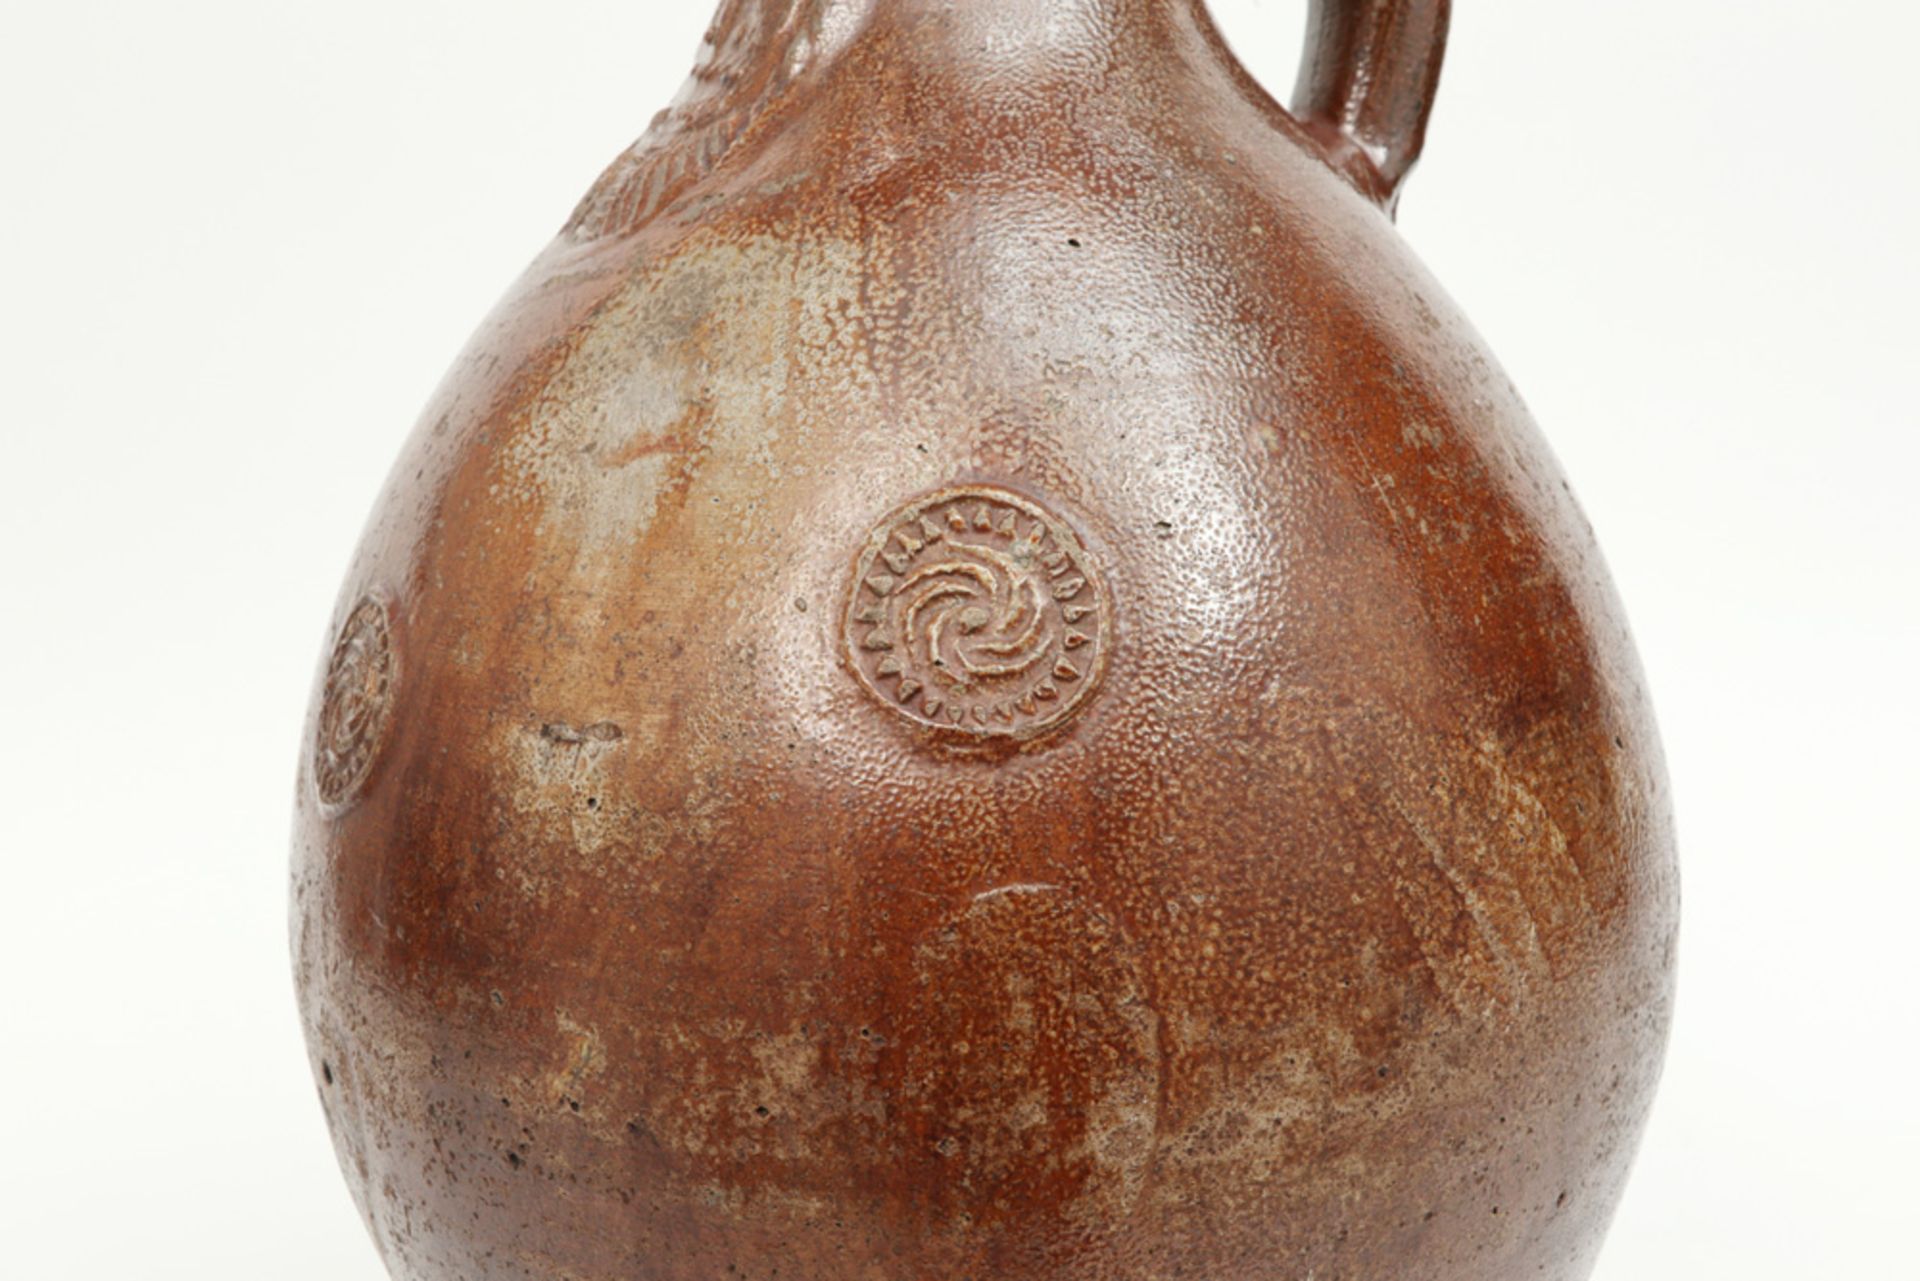 17th Cent. German pitcher, a Barthmann jar, in earthenware - Image 5 of 7